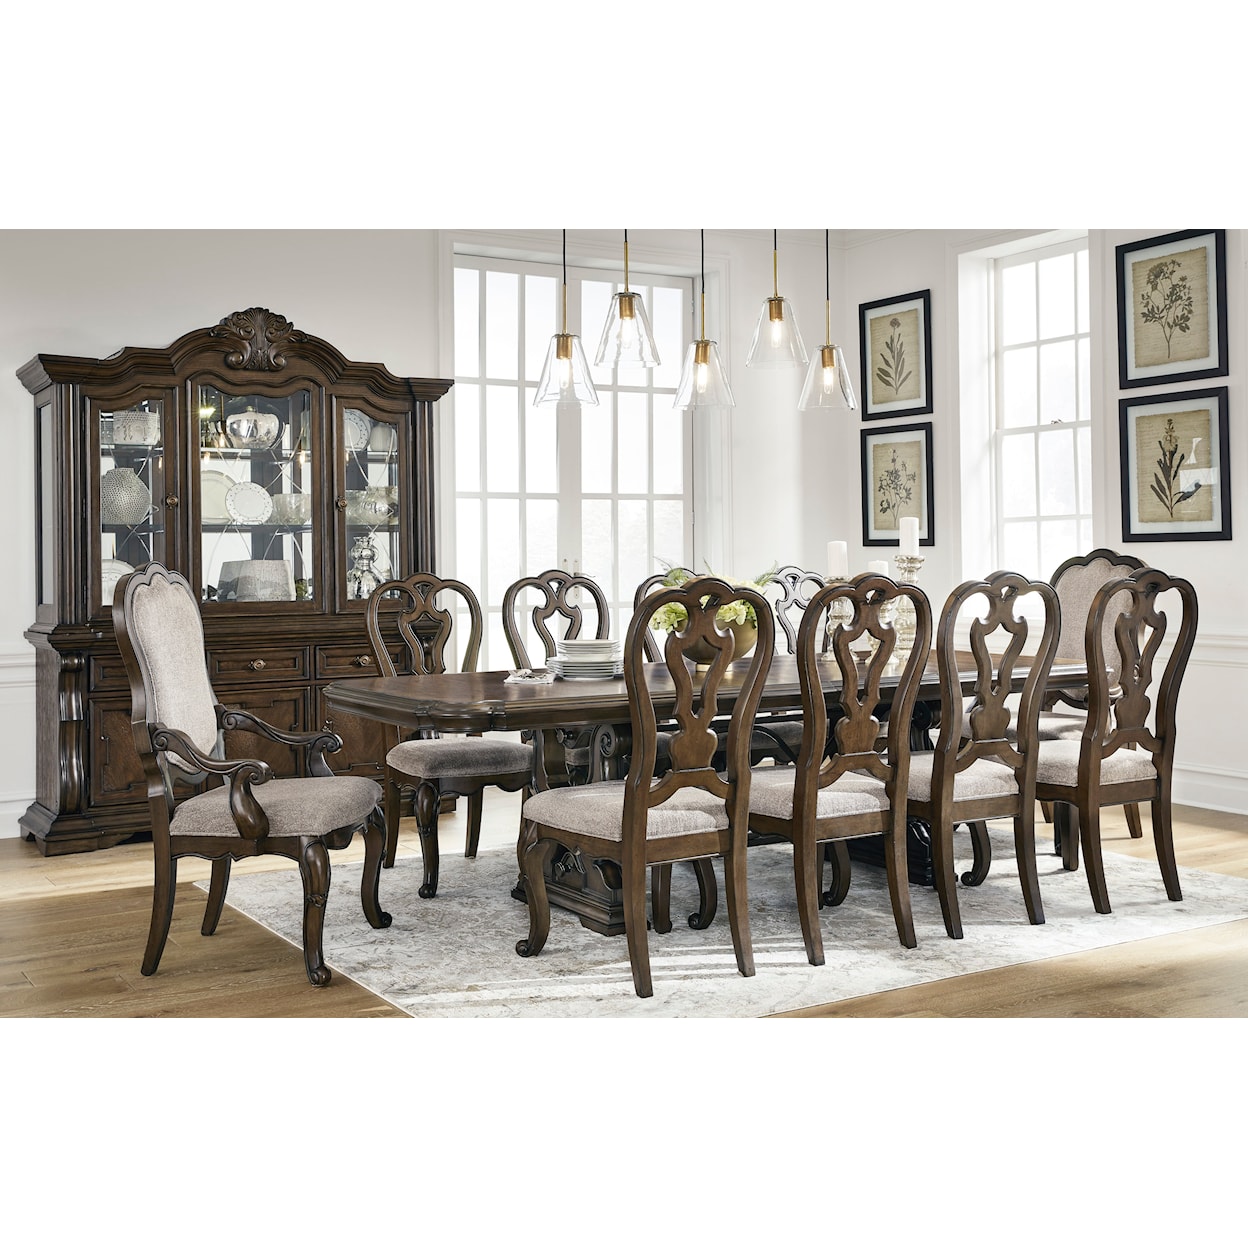 Signature Design by Ashley Maylee Dining Set